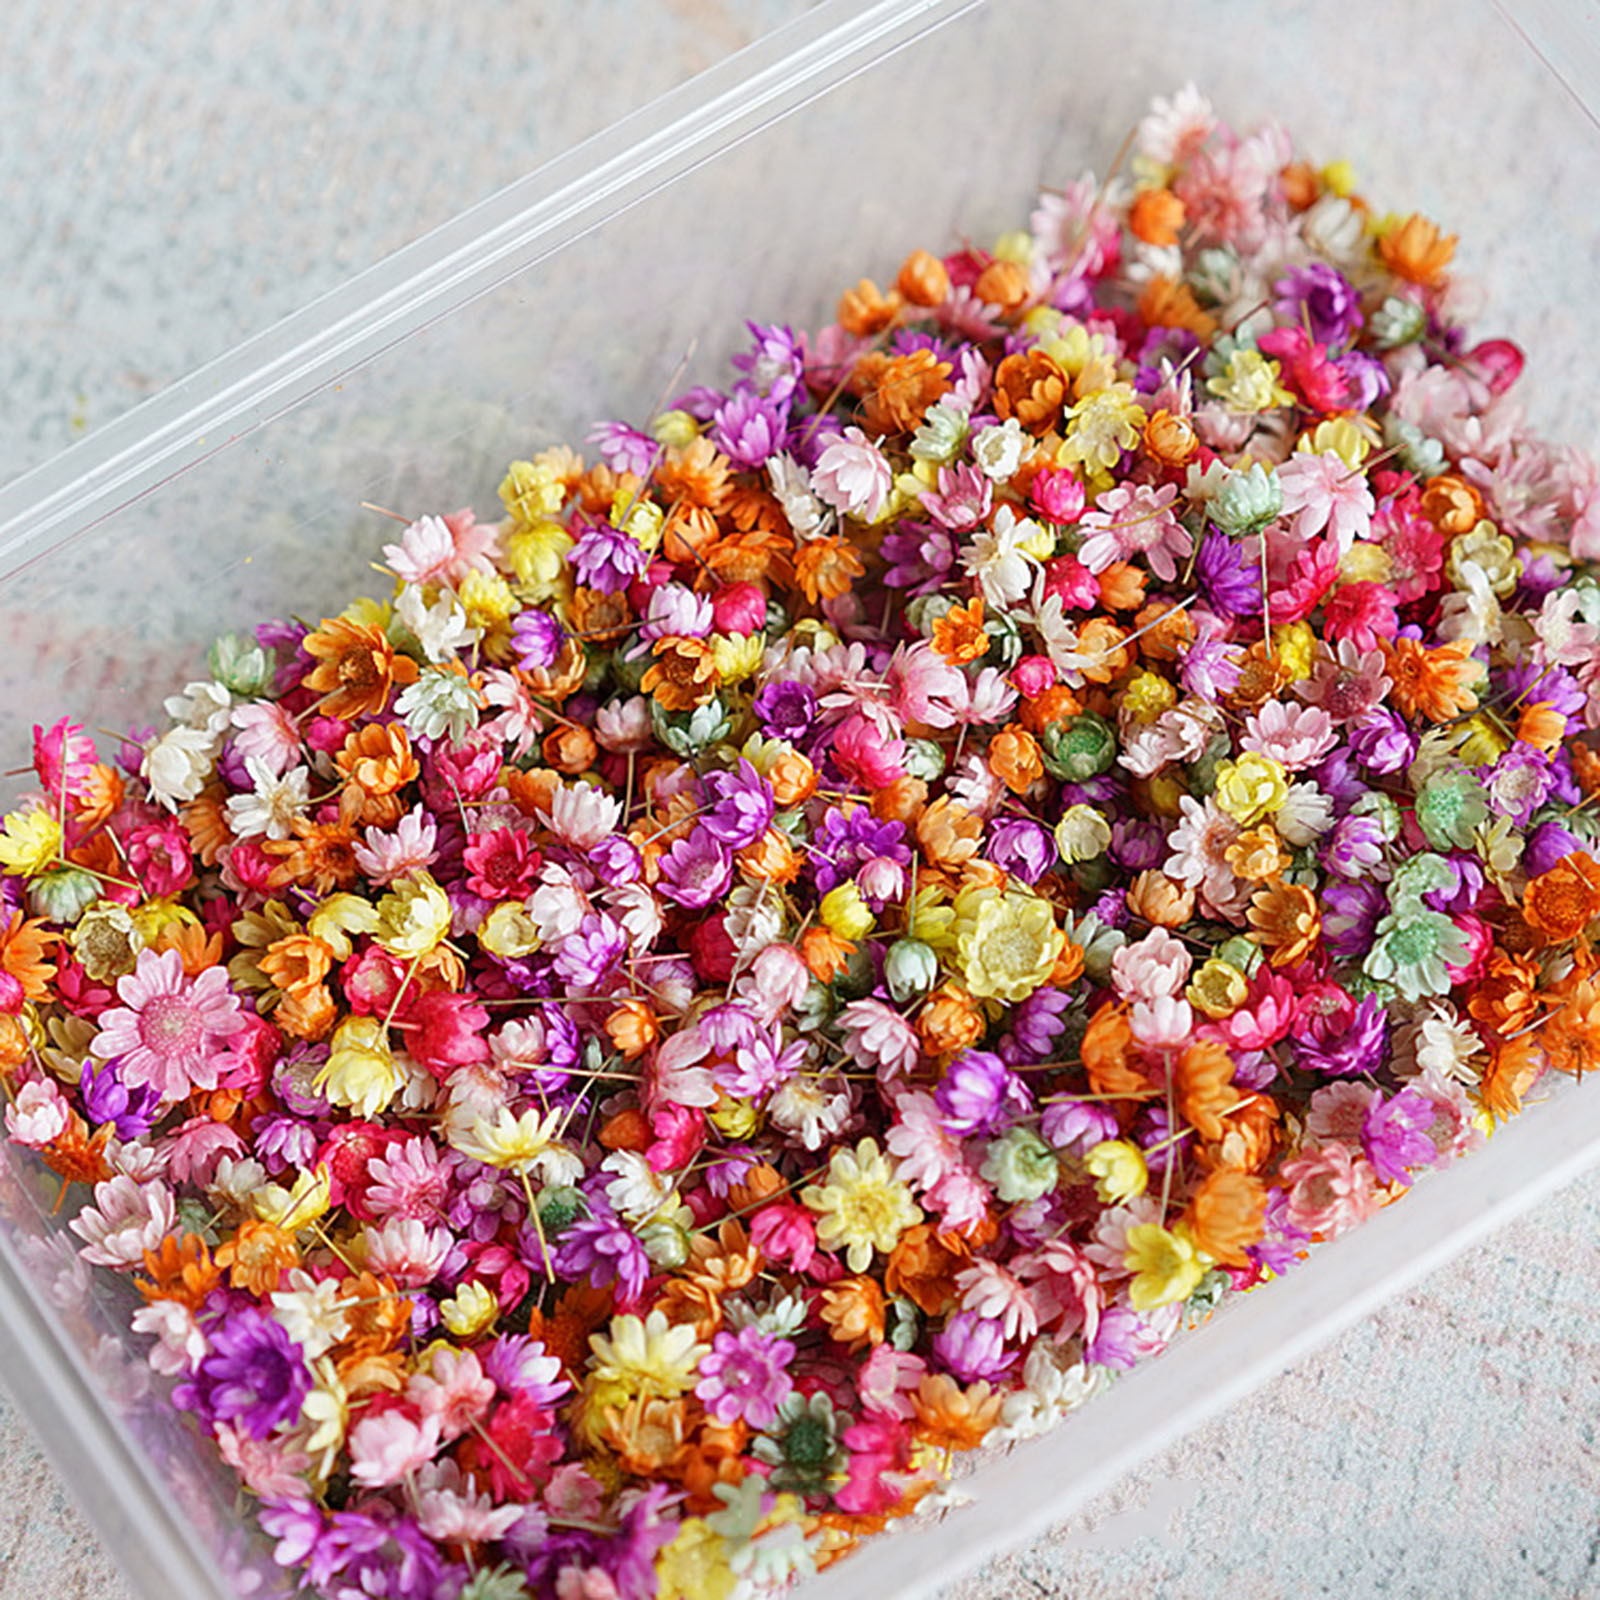 Picture of Real Dried Flower Resin Jewelry Craft Filling Material Multicolor 1 Packet